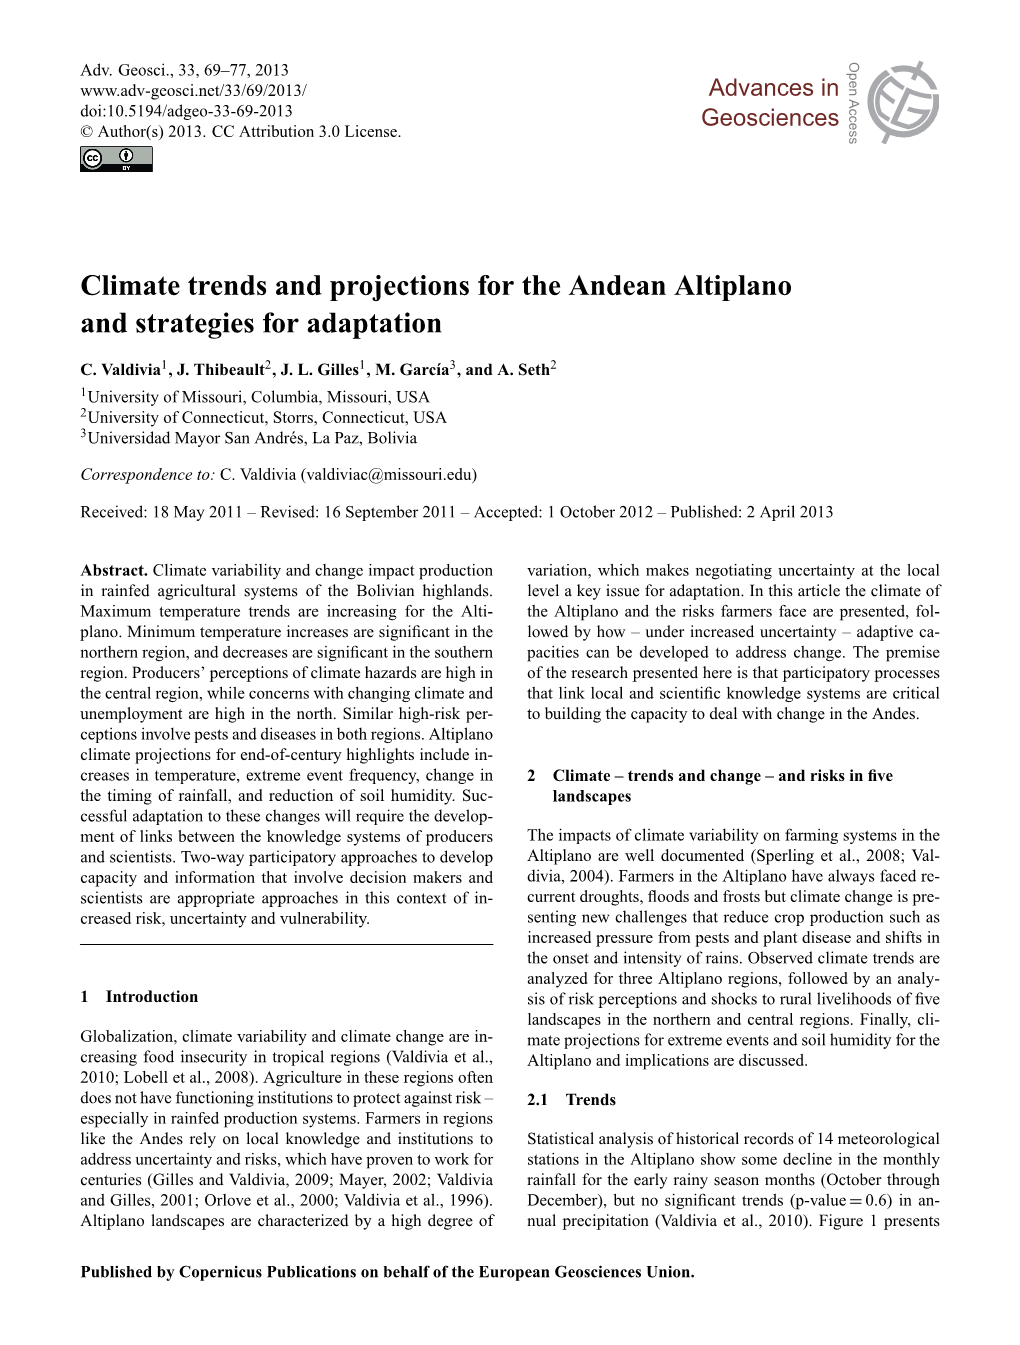 Climate Trends and Projections for the Andean Altiplano and Strategies For